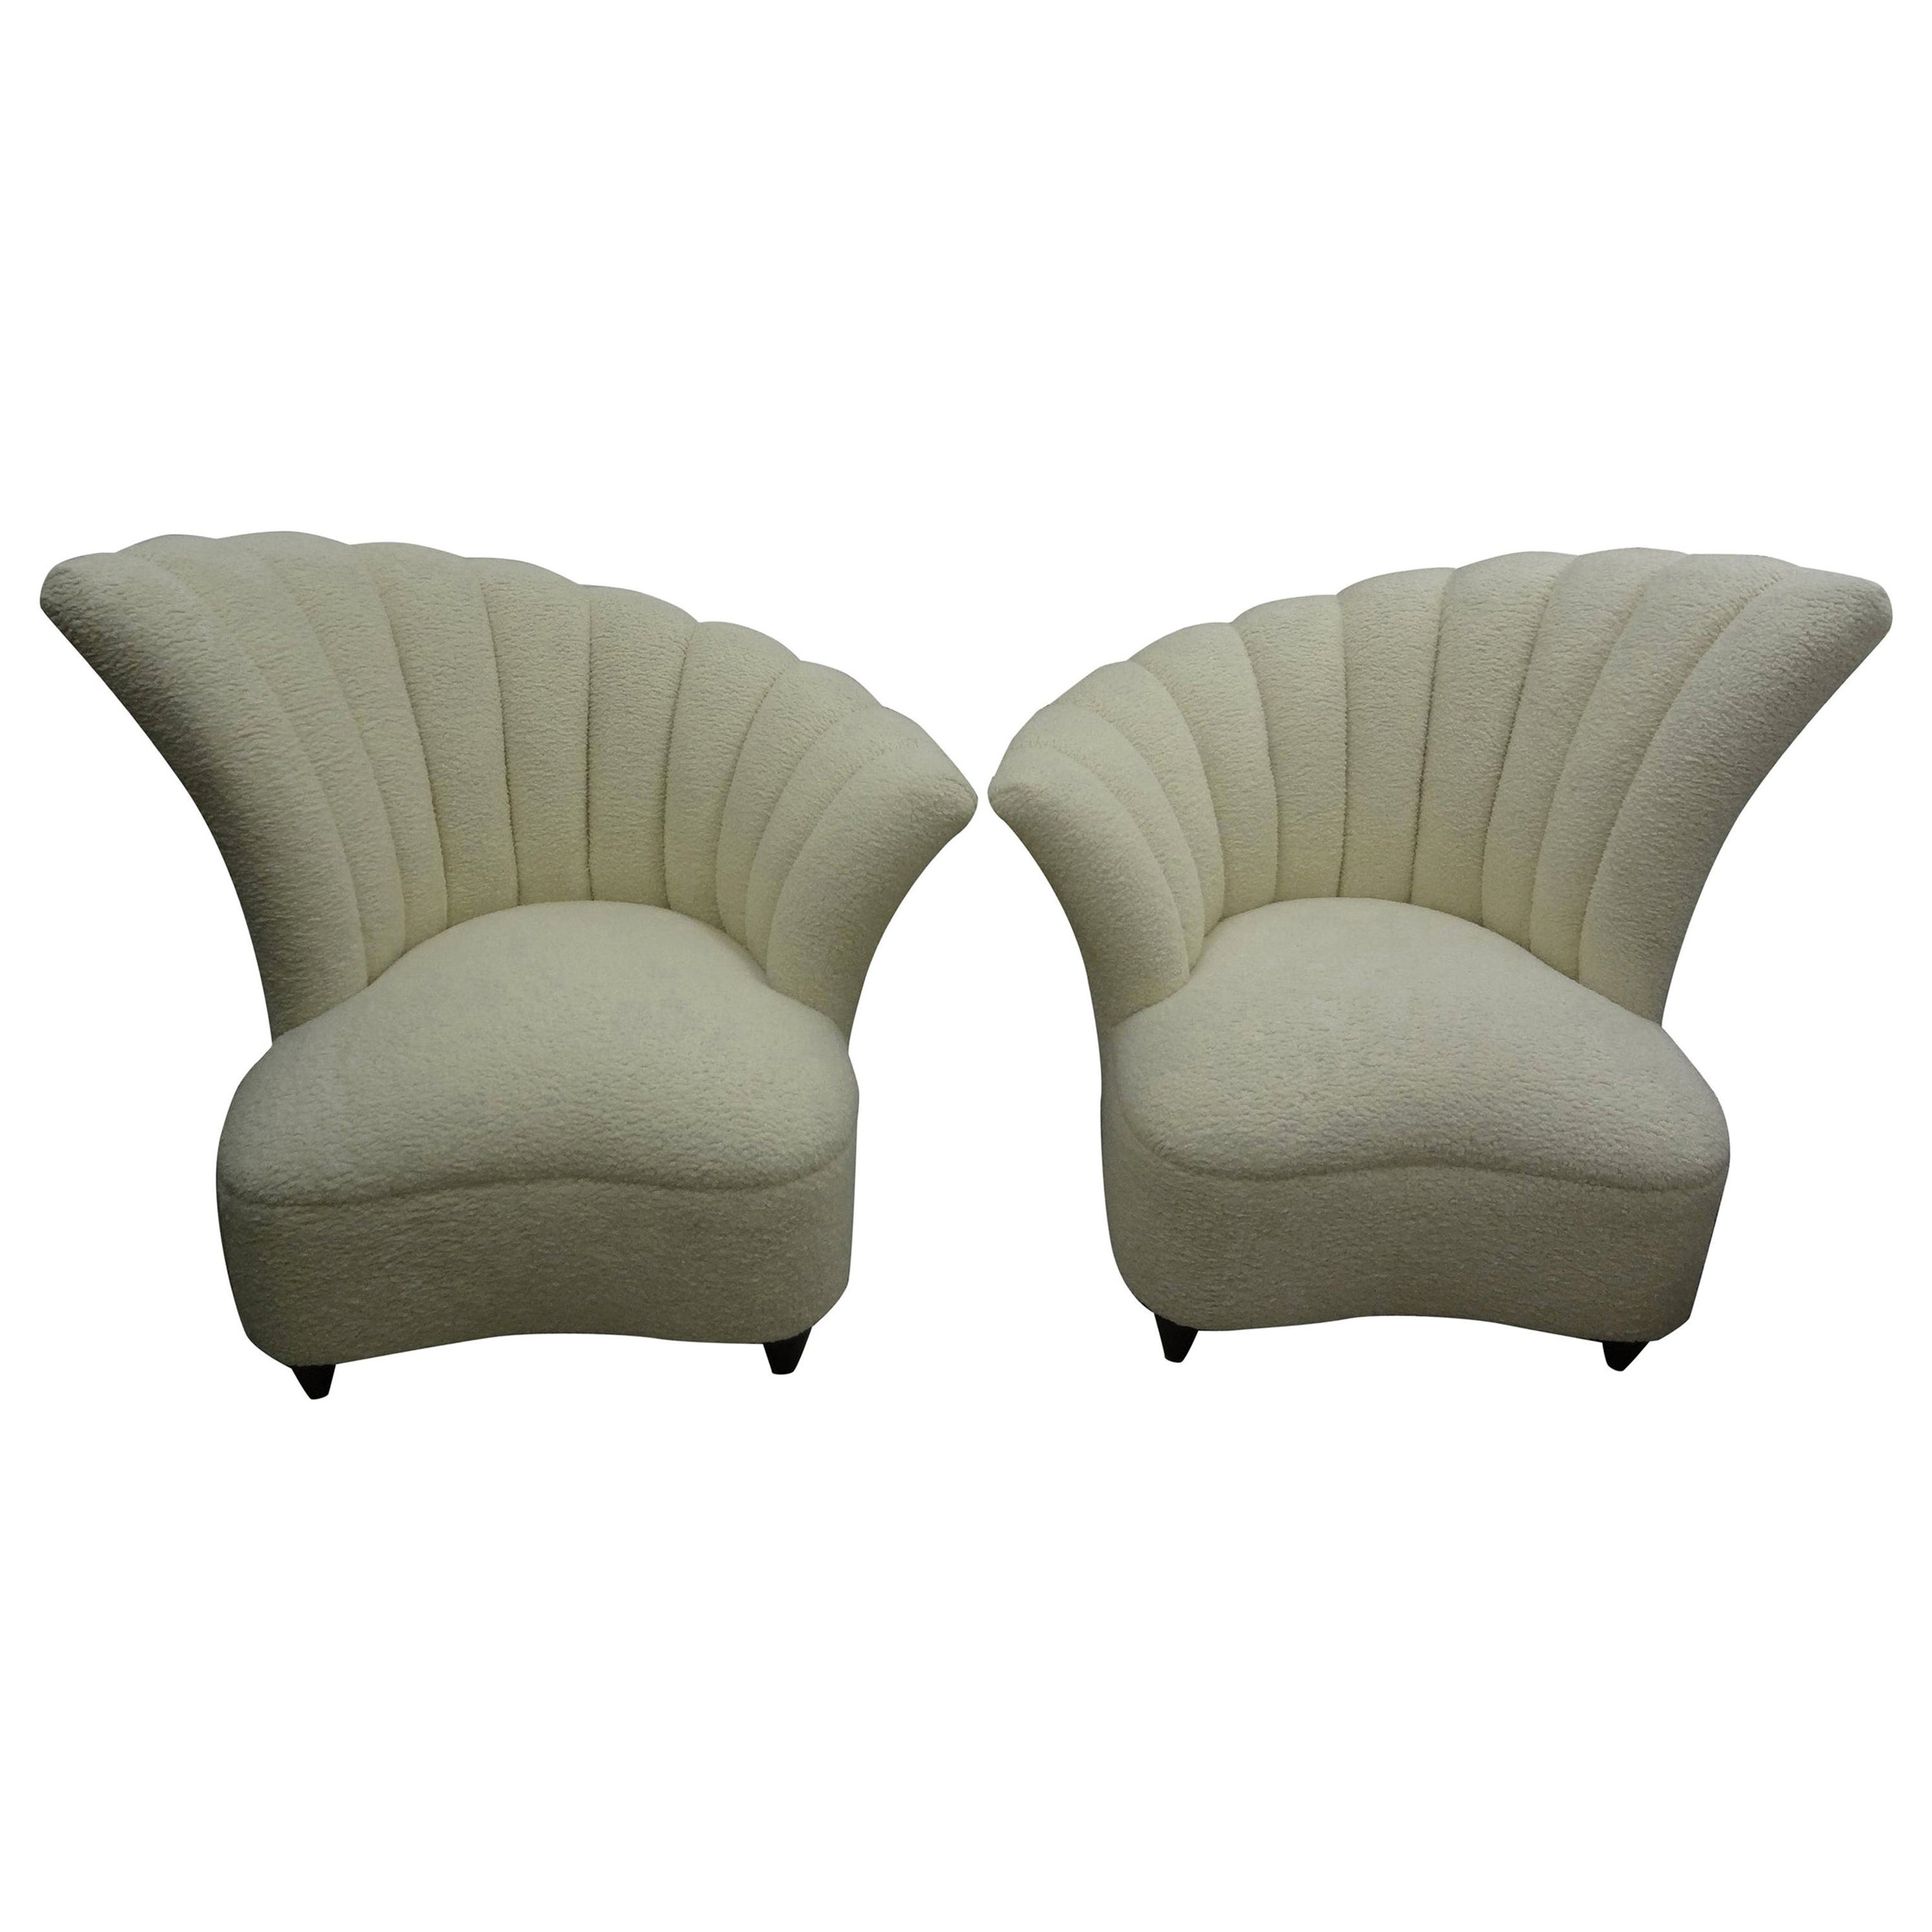 Pair of Grosfeld House Asymmetrical Channel Back Lounge Chairs